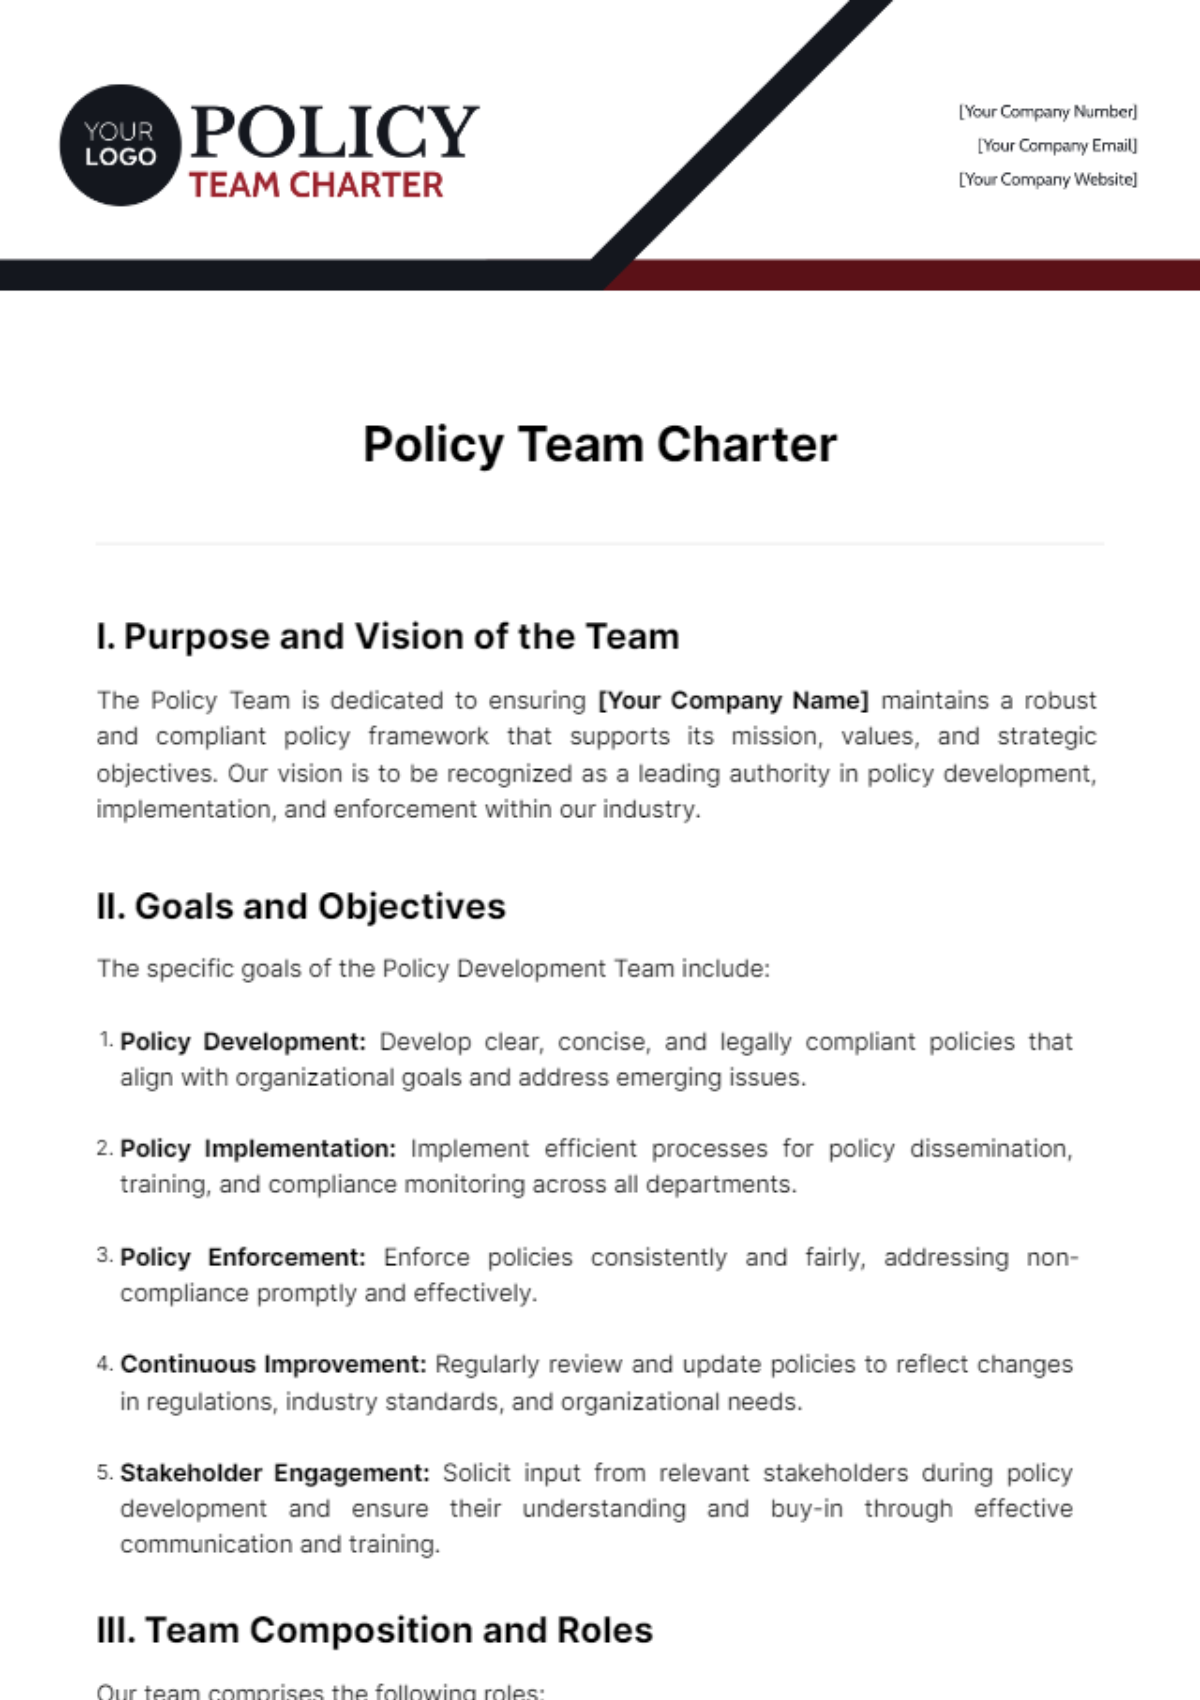 Policy Team Charter Template